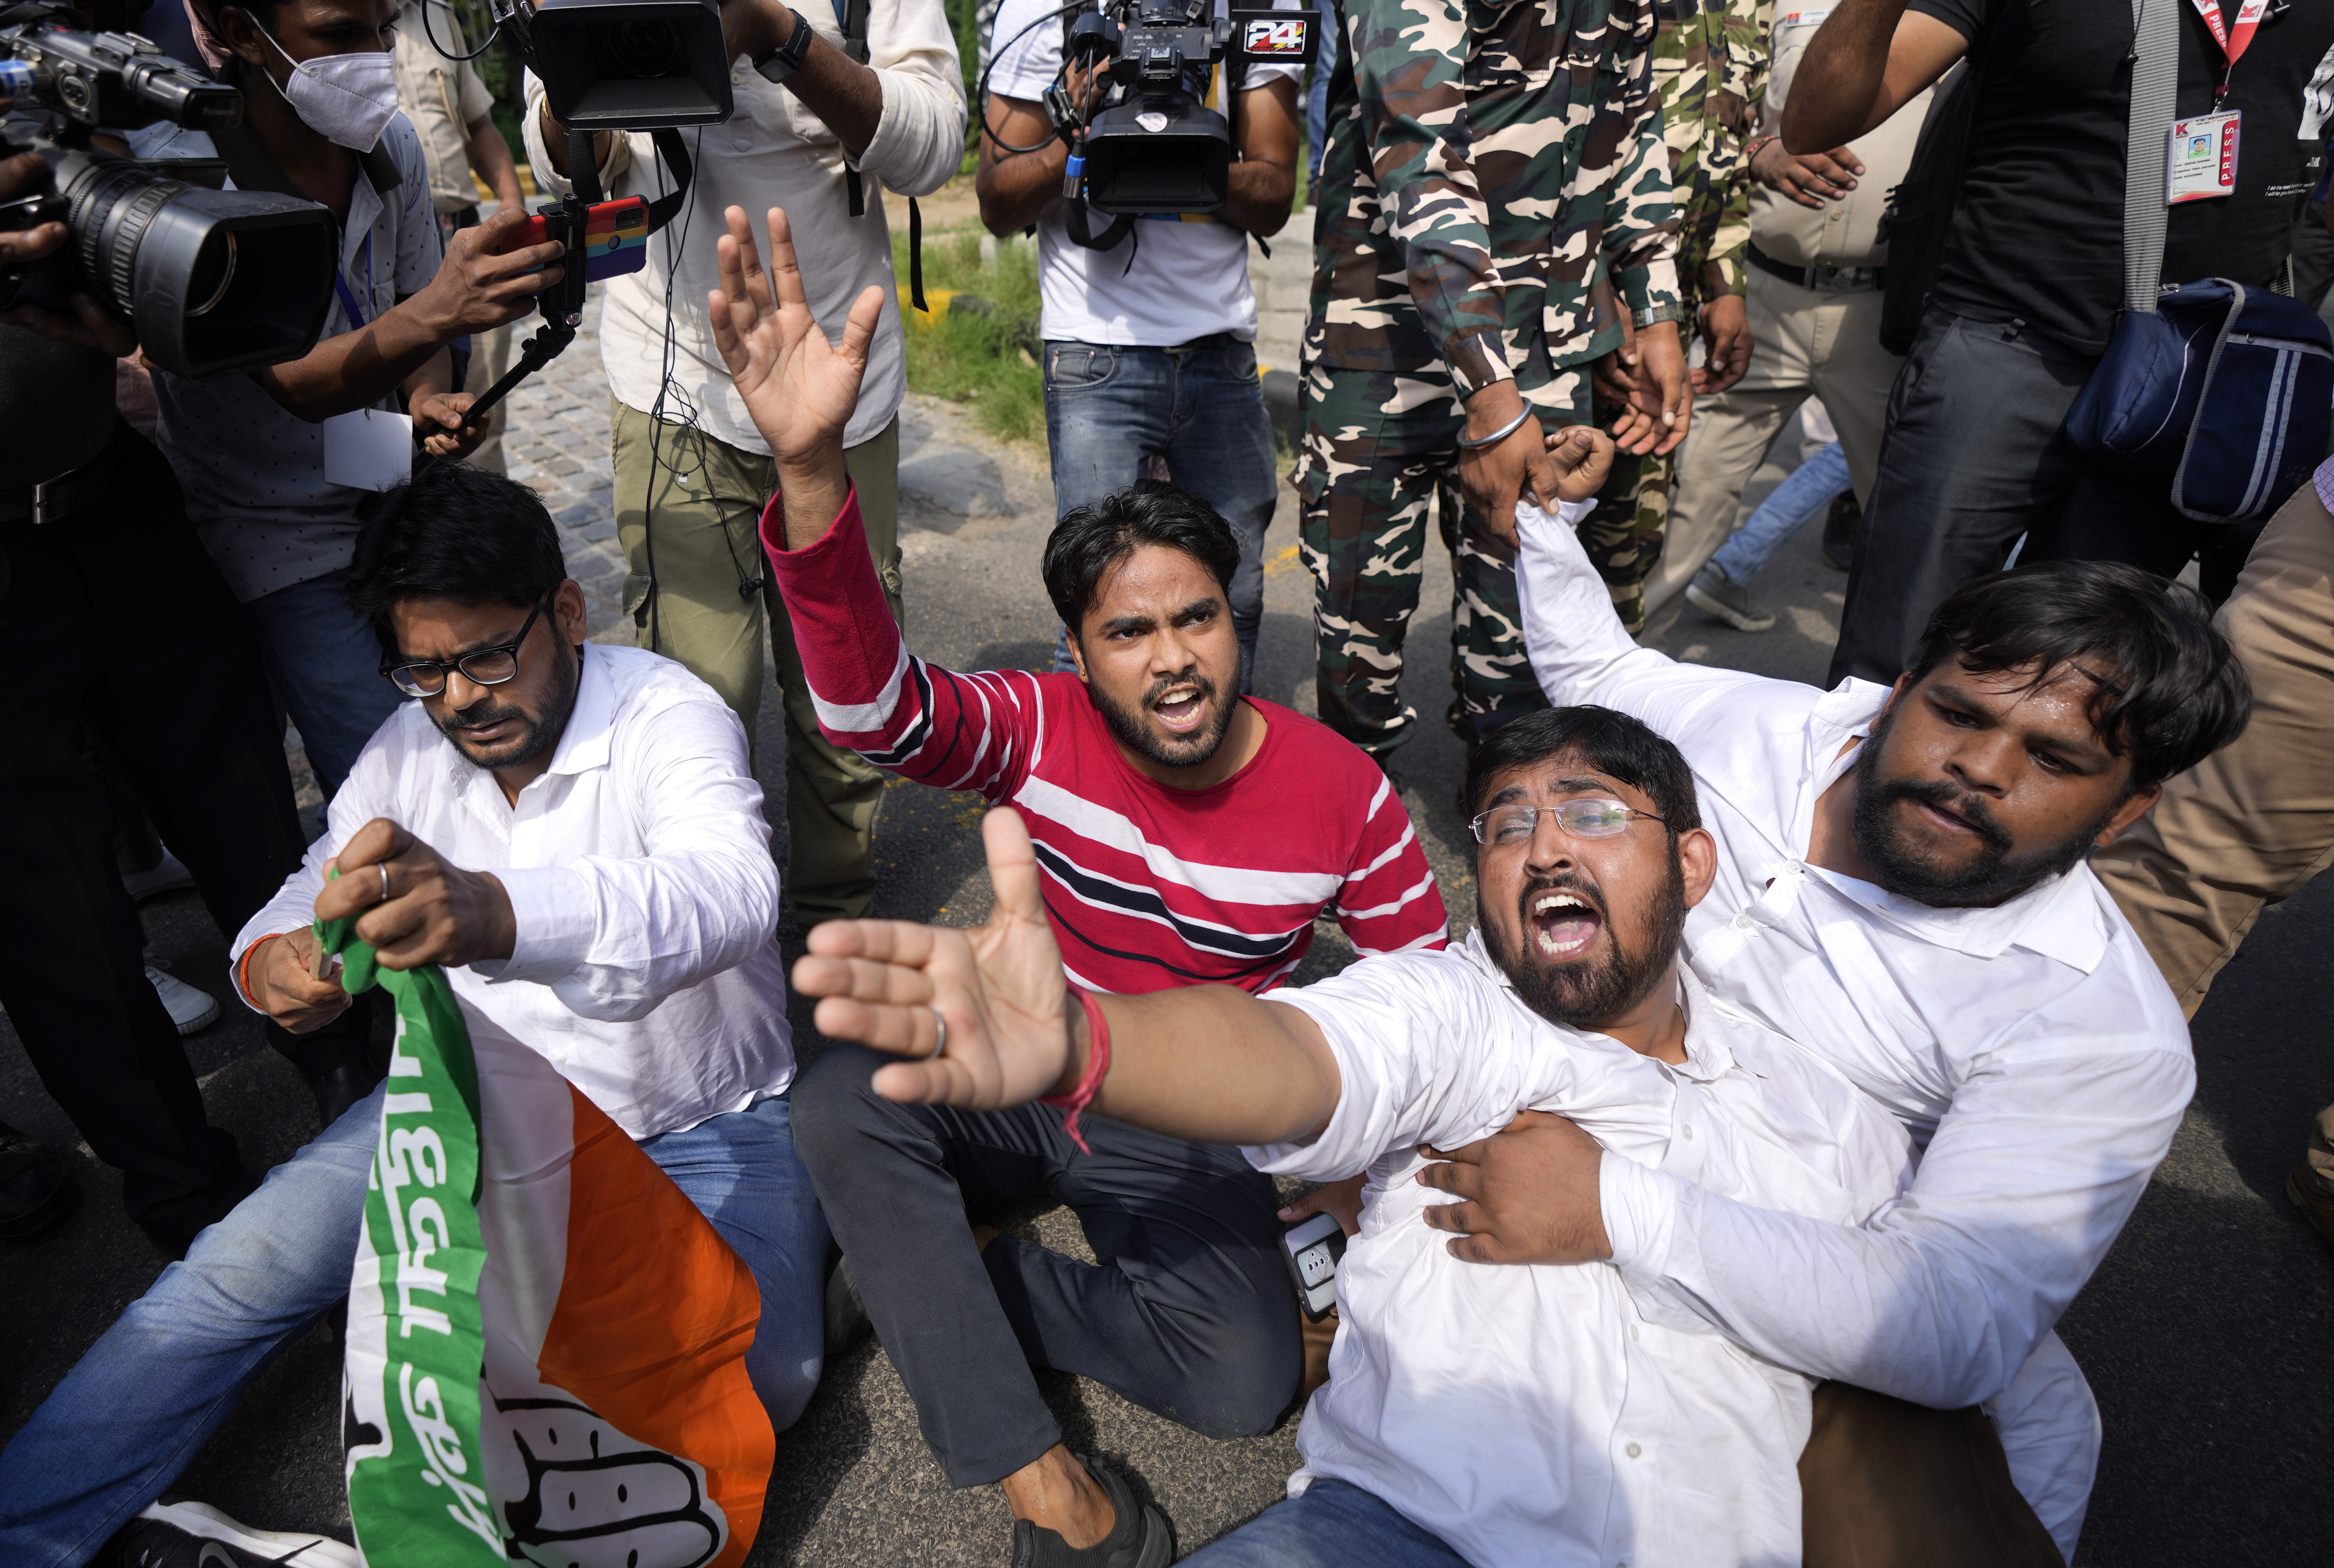 Activists of Congress party's youth wing protesting against Sunday's killing of four farmers in Uttar Pradesh state after being run over by a car owned by India's junior home minister shout slogans in New Delhi, India, Monday, Oct. 4, 2021. Indian authorities suspended internet services and barred political leaders from entering a northern town Monday to calm tensions after nine people were killed in a deadly escalation of a yearlong demonstration against contentious agriculture laws. (AP Photo/Manish Swarup)